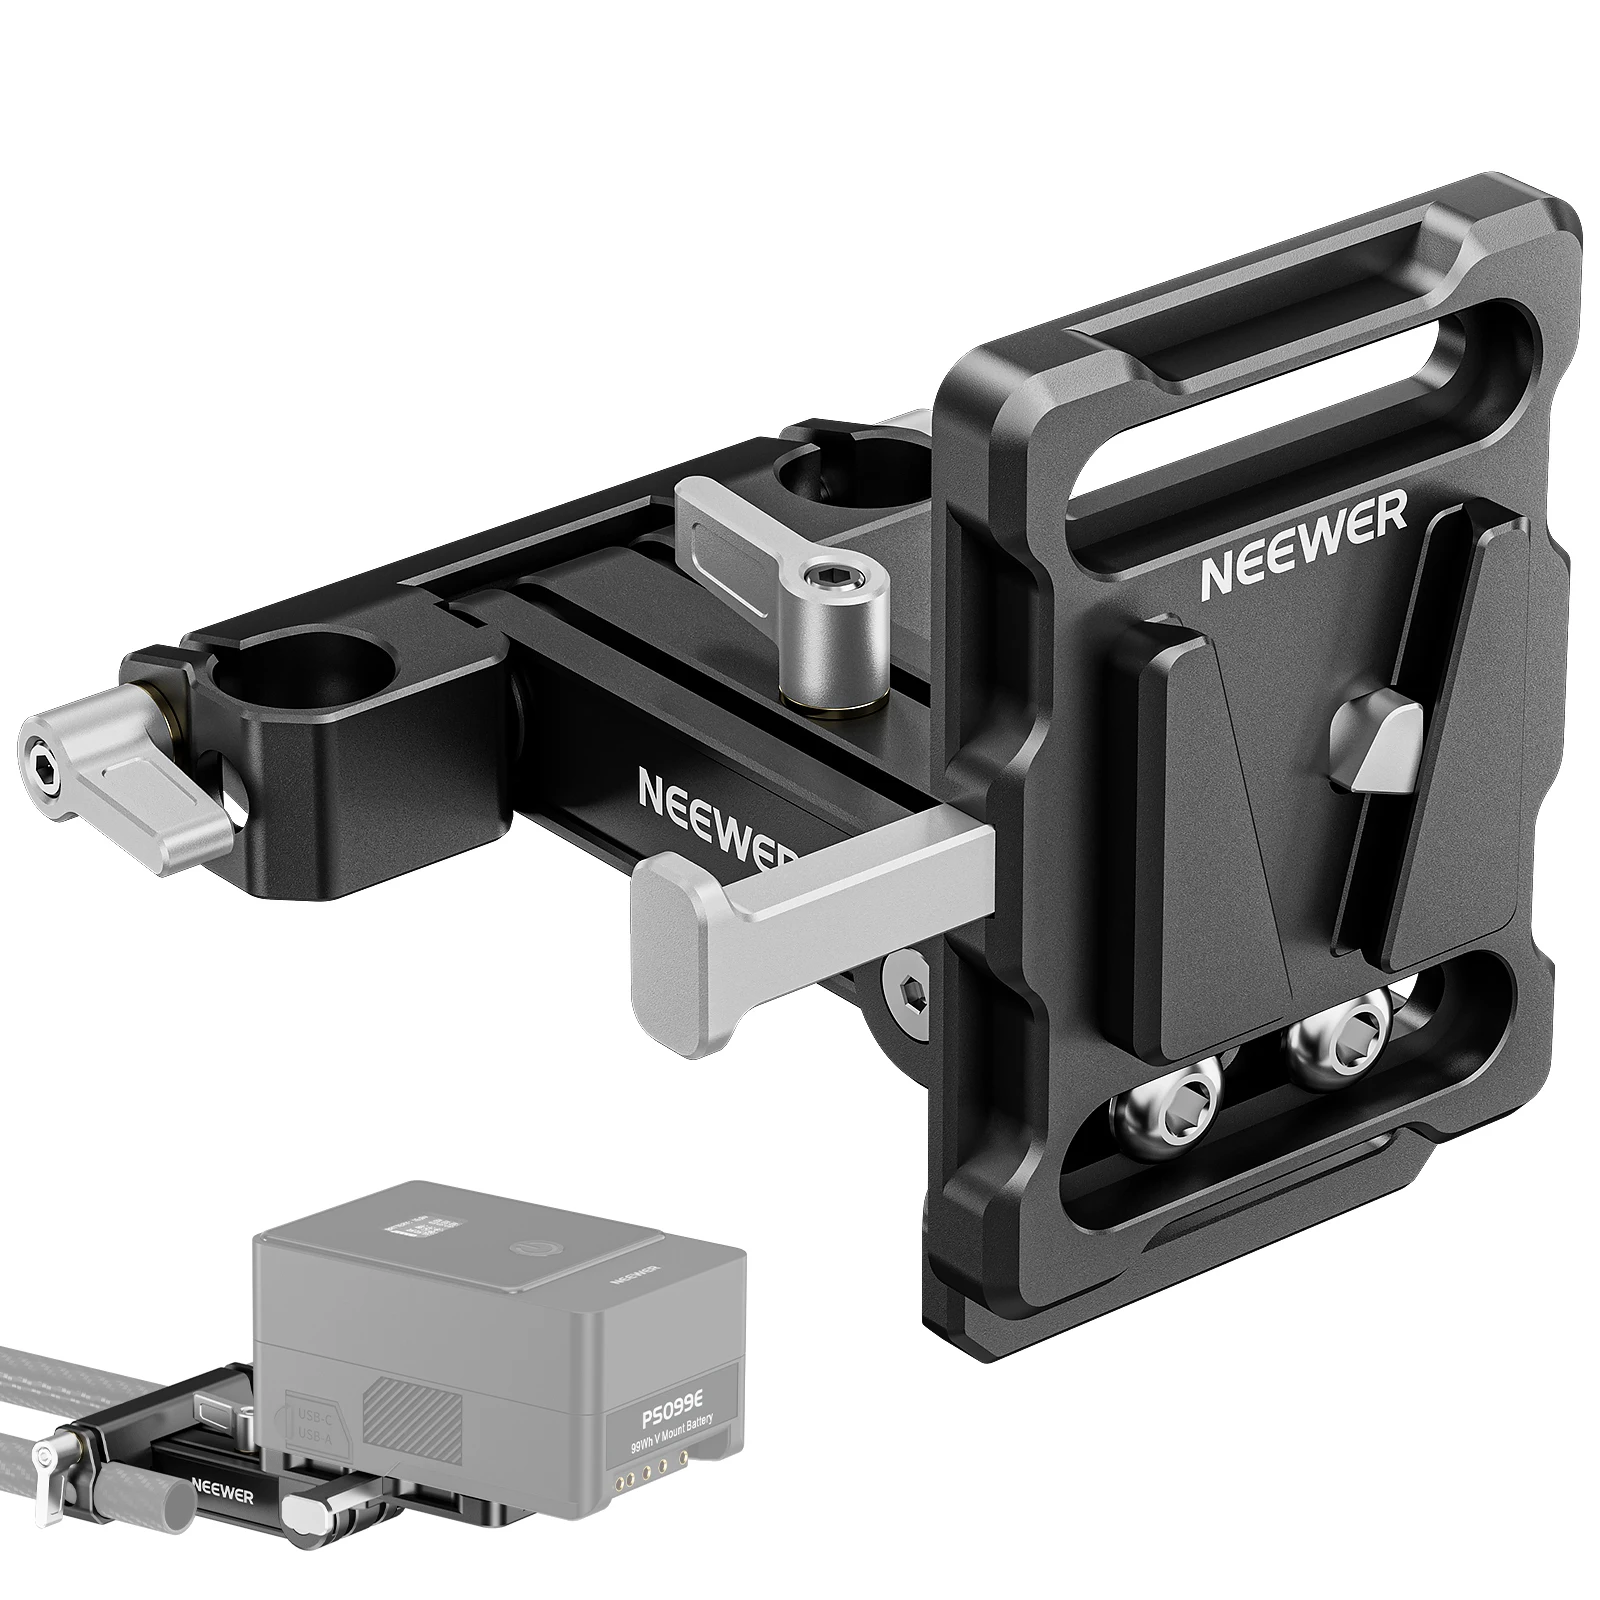 

NEEWER Mini V Mount Battery Plate with 15mm LWS Rod Clamps, 180° Tilt Foldable L Shaped V Lock Battery Plate with Quick Release